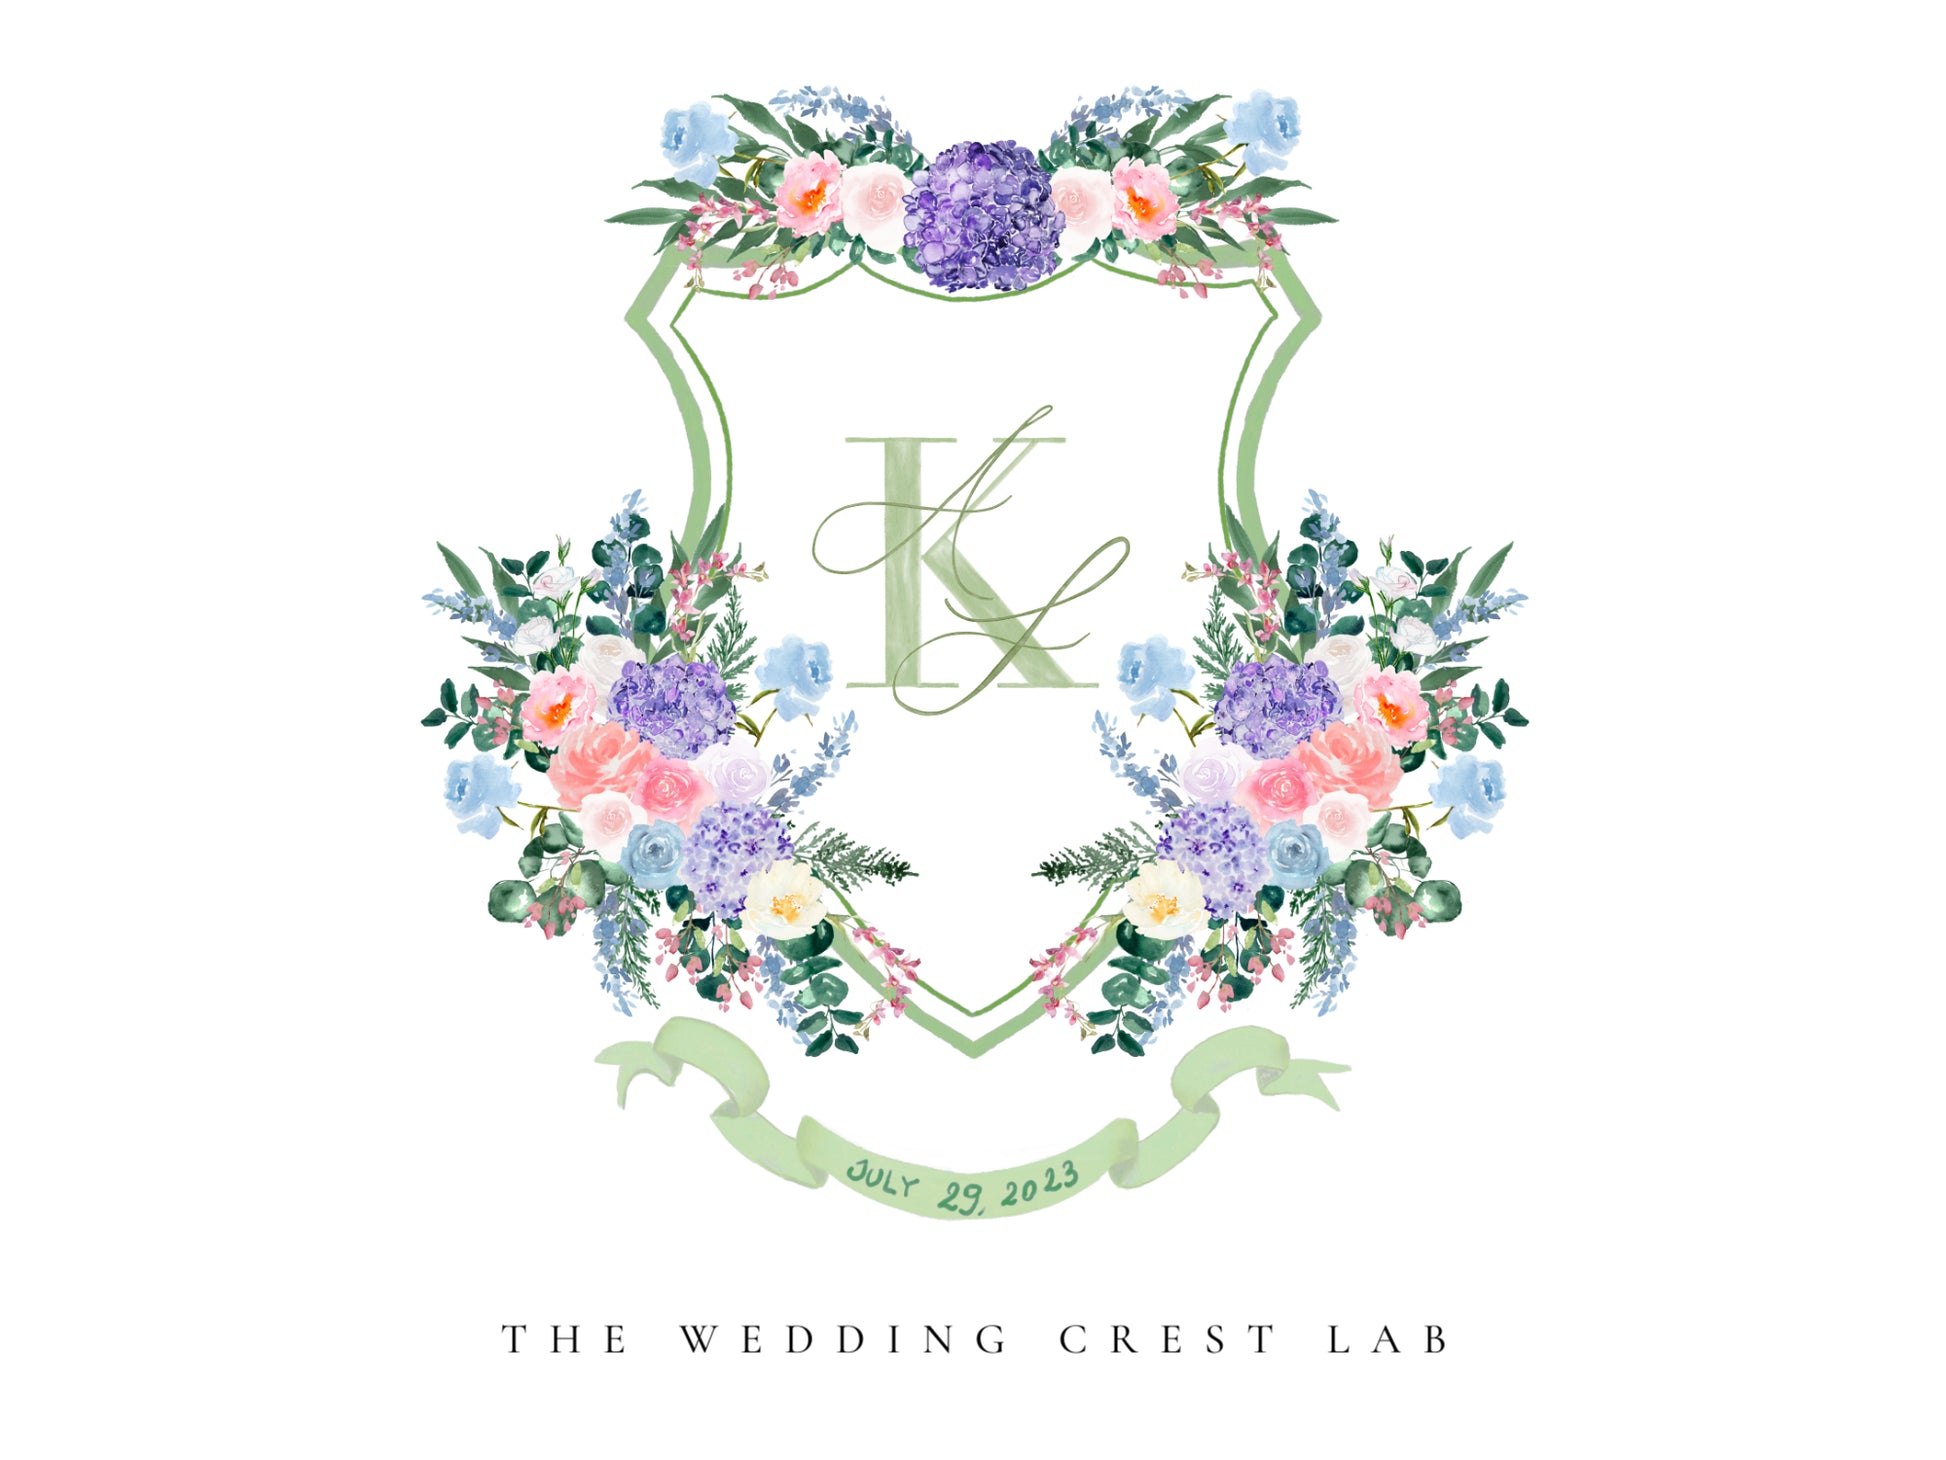 Custom wedding crest with watercolor flowers and pet or venue portrait